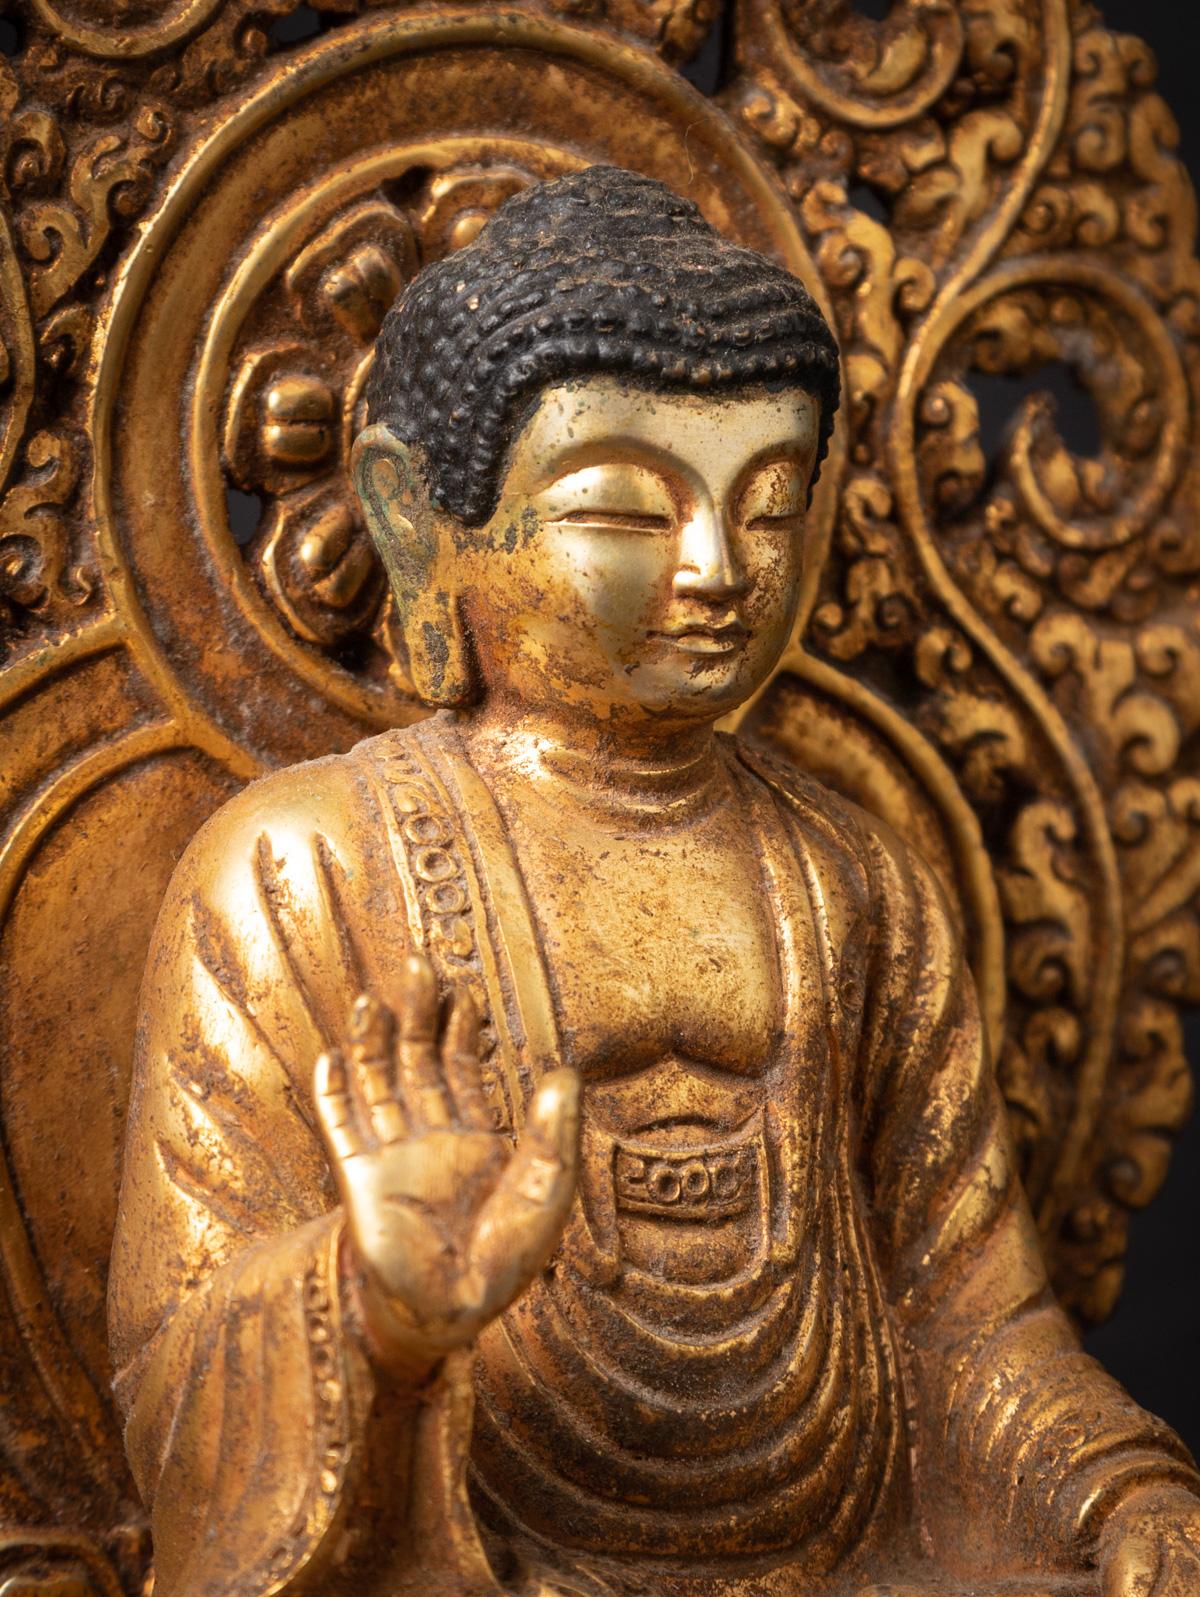 Material : bronze
28,4 cm high
17 cm wide and 17 cm deep
Fire gilded with 24 krt. gold
Abhaya mudra
Middle 20th century
Bought in Nepal in 2022
Weight: 2,99 kgs
Originating from Japan
Nr: 3700-50